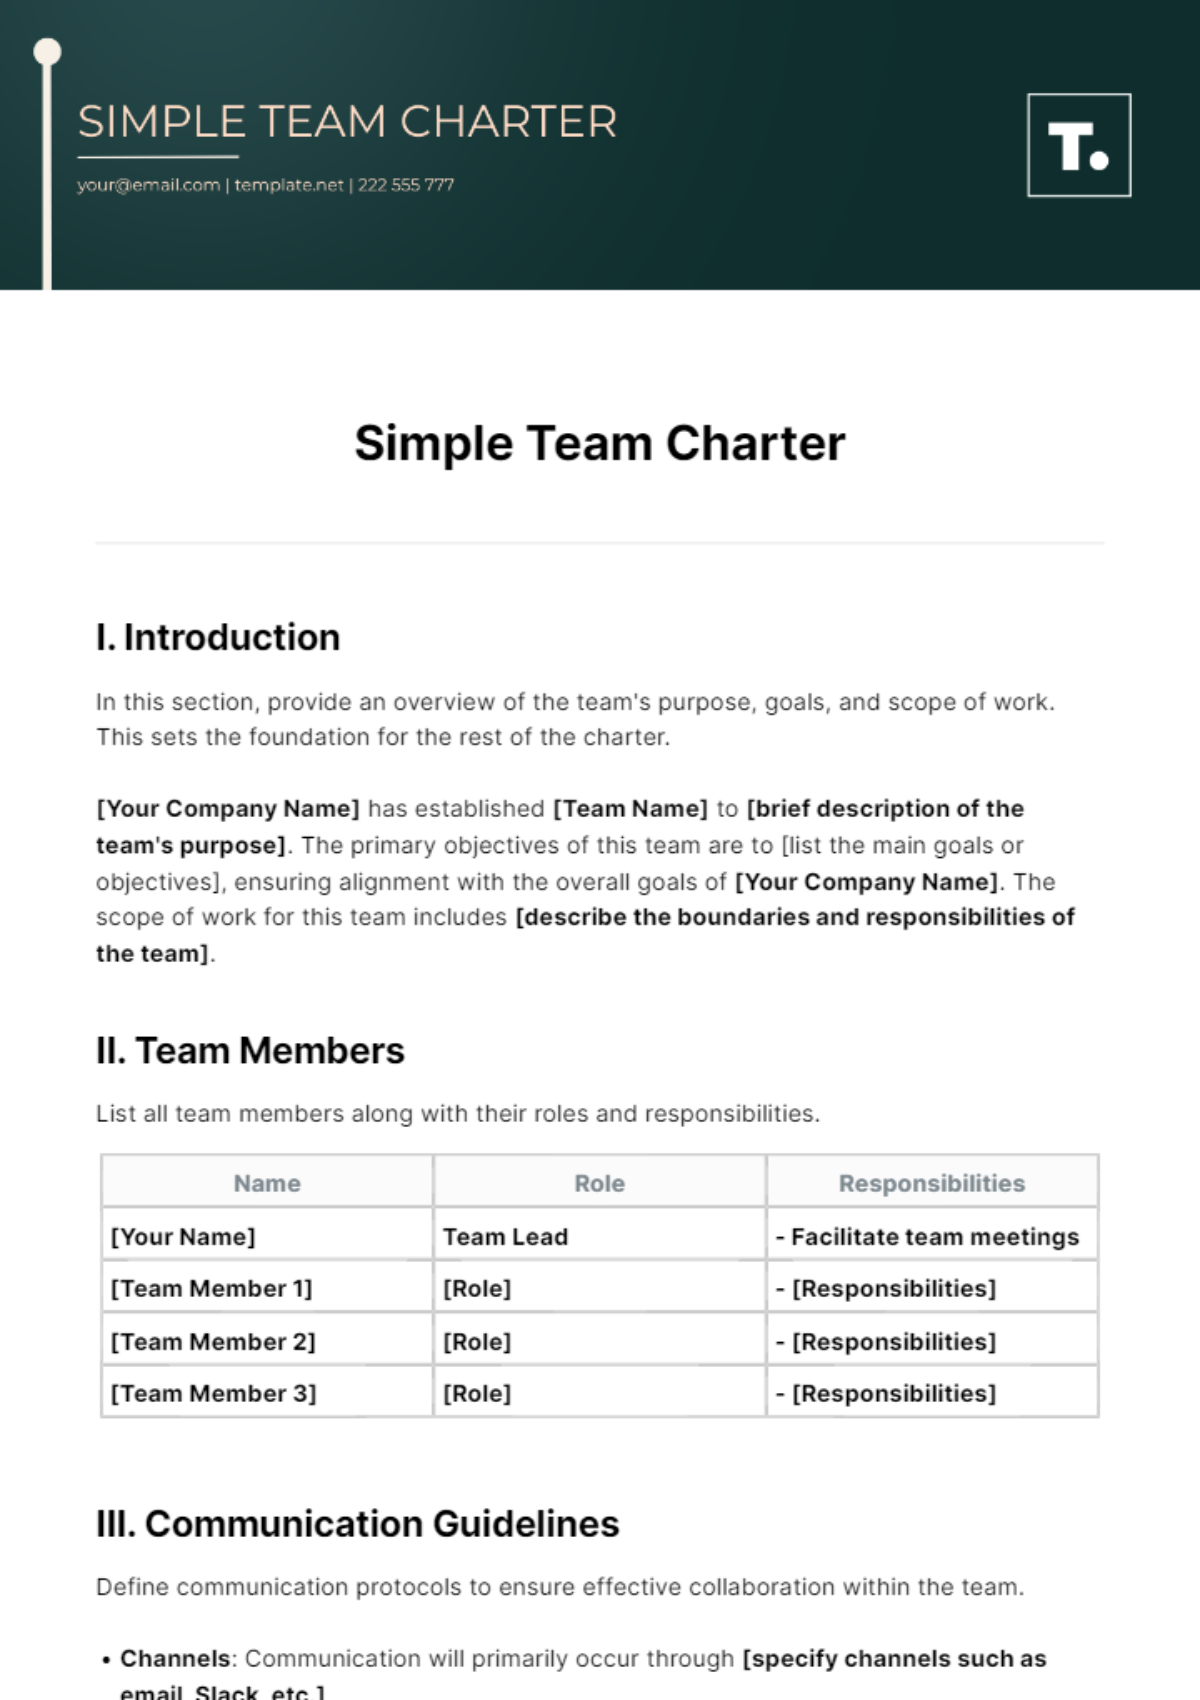 Simple Team Charter Template